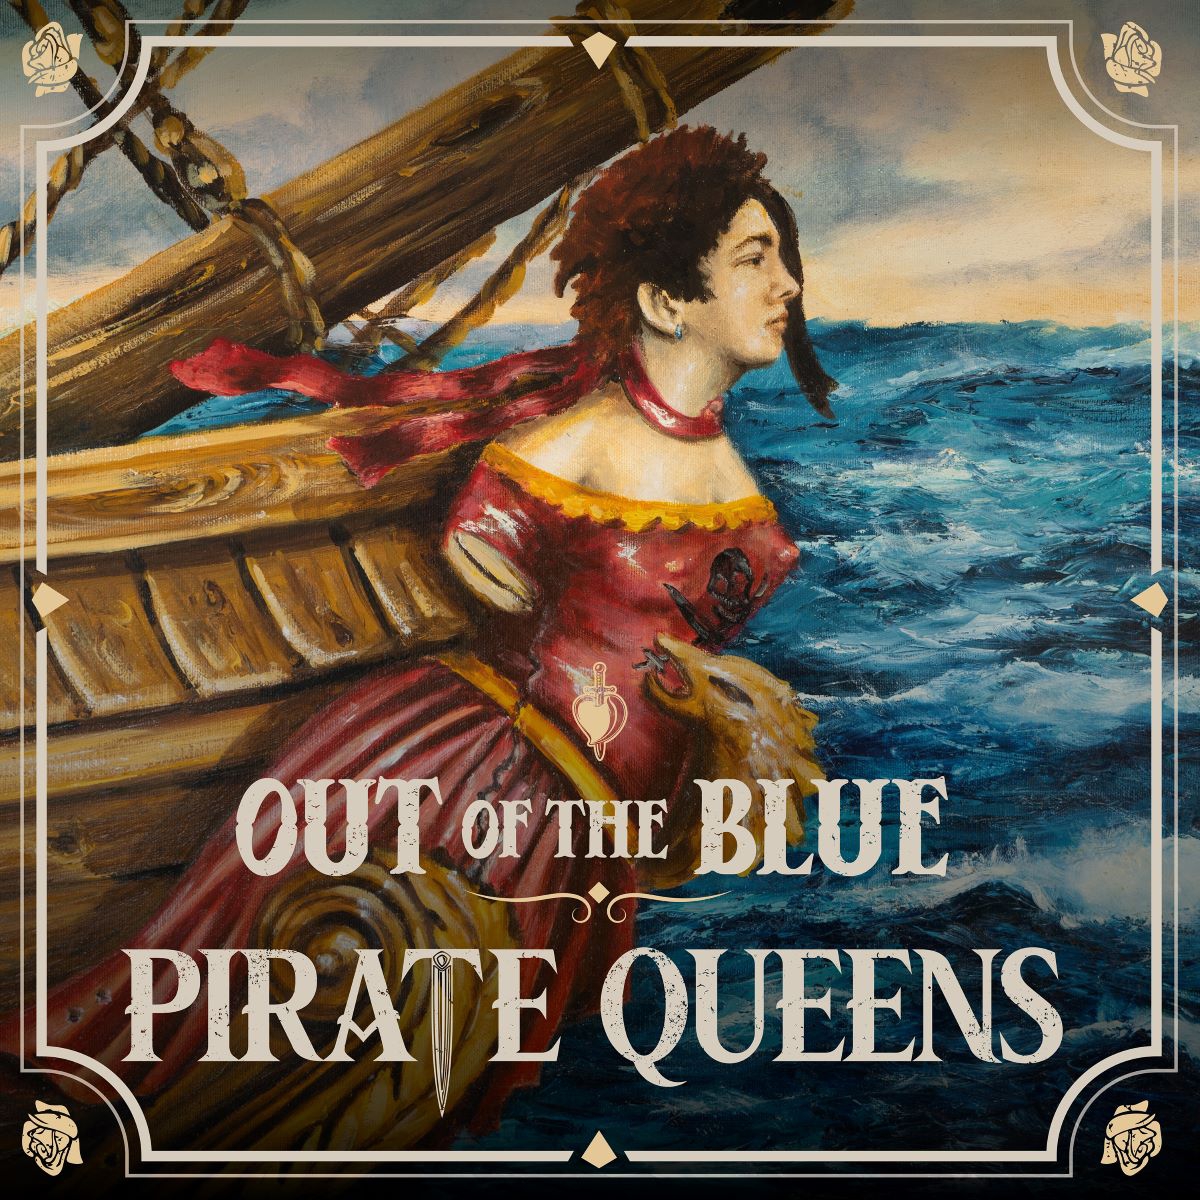 Out of the Blue - “Pirate Queens”